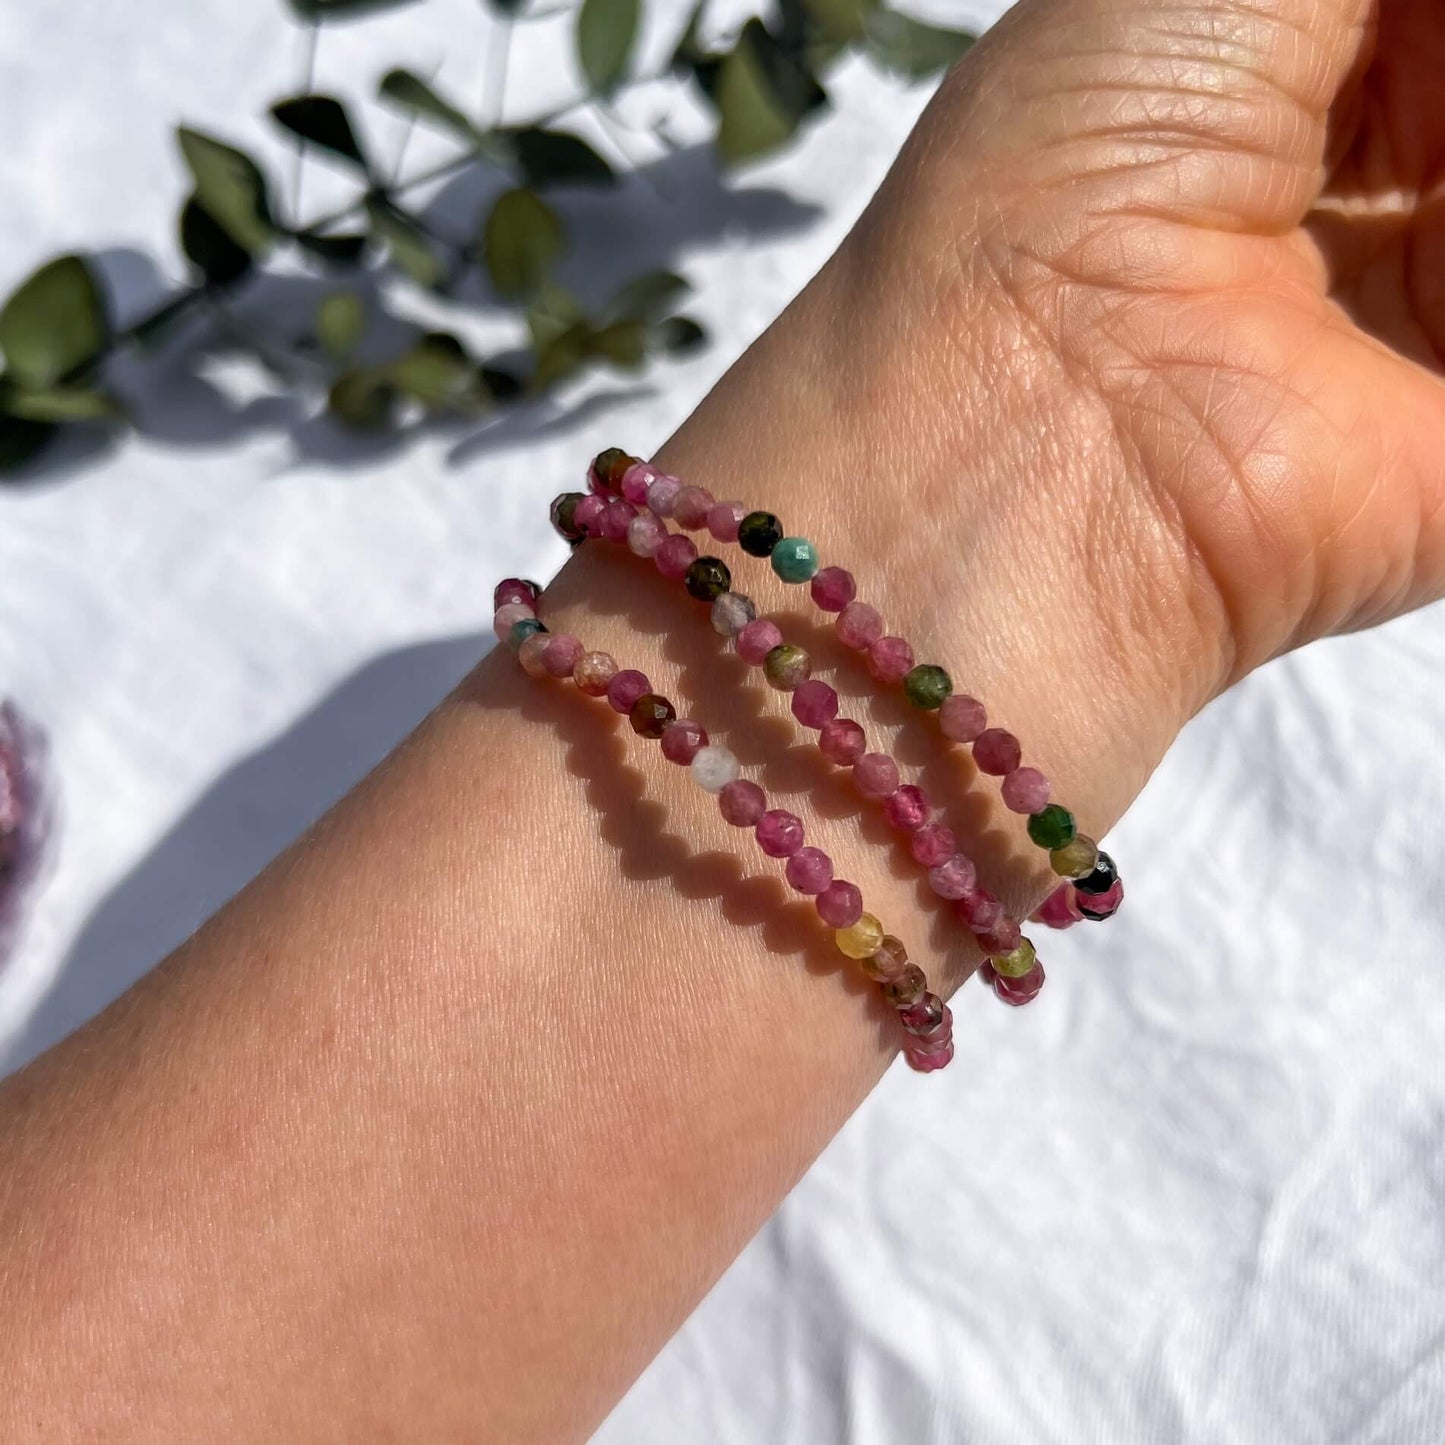 The underside of a woman's wrist with 3 multi-coloured pink, green & purple tourmaline crystal faceted bead bracelets